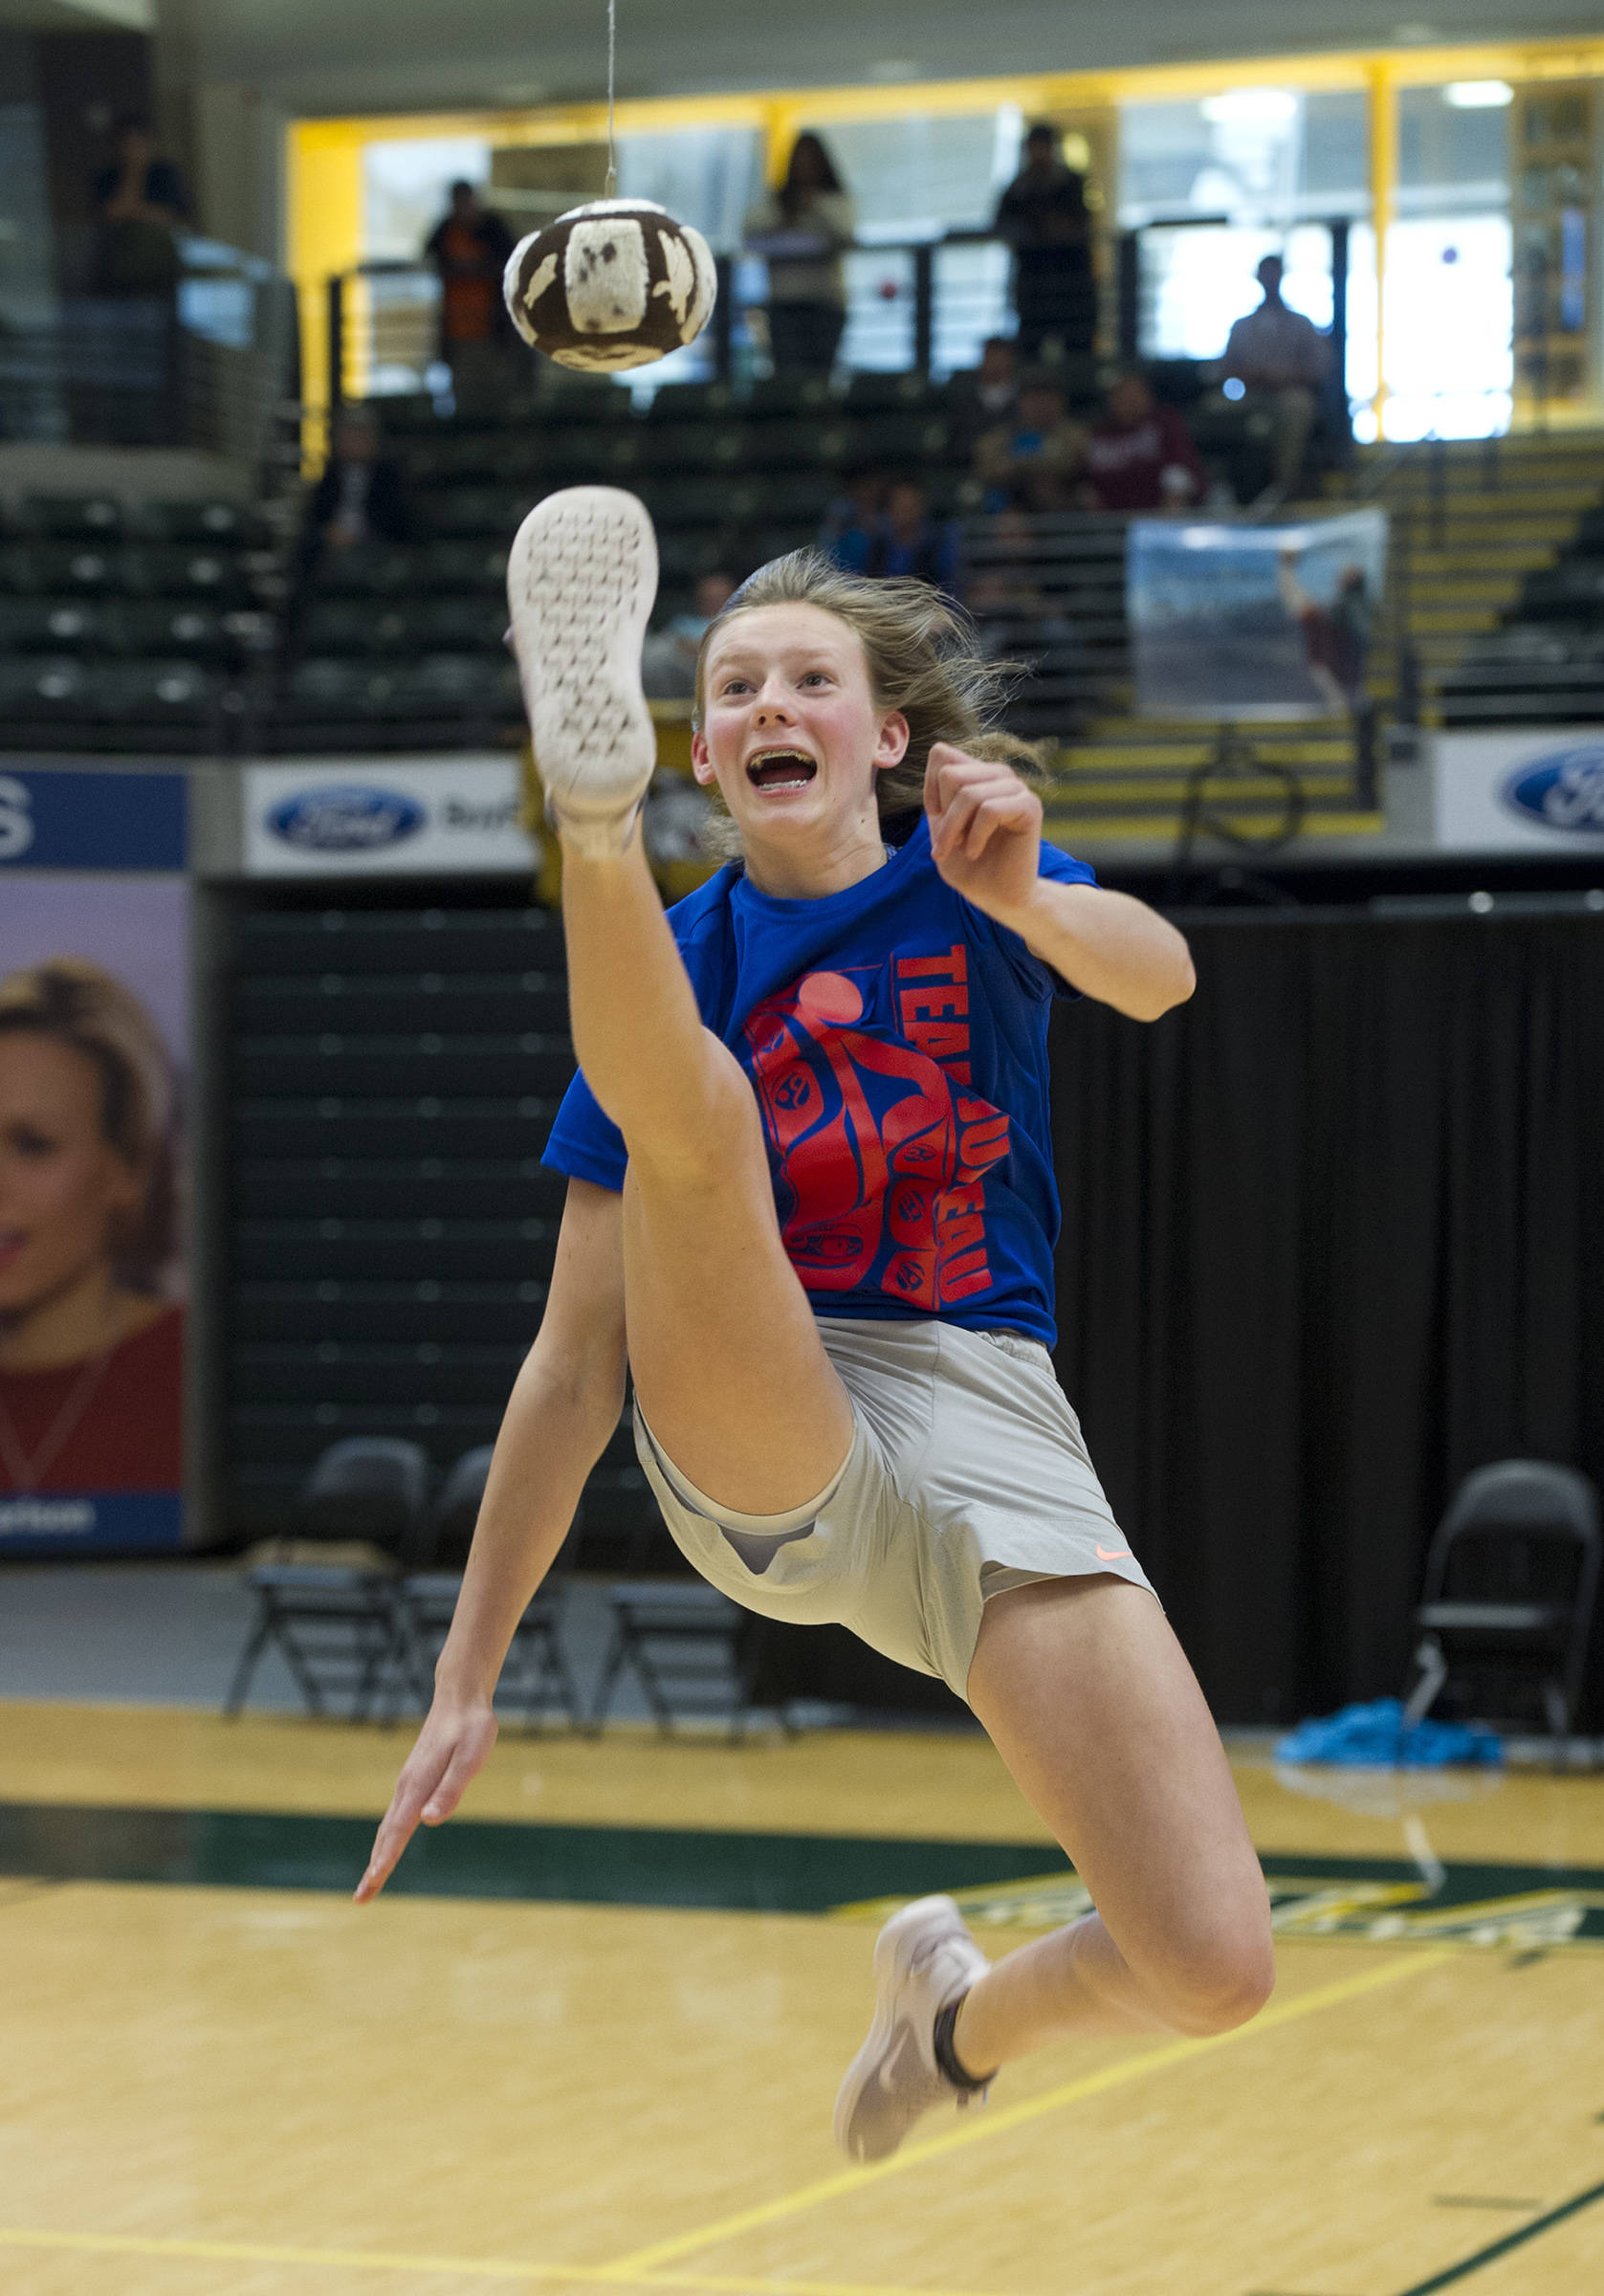 Skylar Tuckwood performs the one-foot high kick at the 2019 NYO Games at the Alaska Airlines Center in Anchorage, Alaska, on Saturday, April 27, 2019. (Michael Dinneen | For the Juneau Empire)